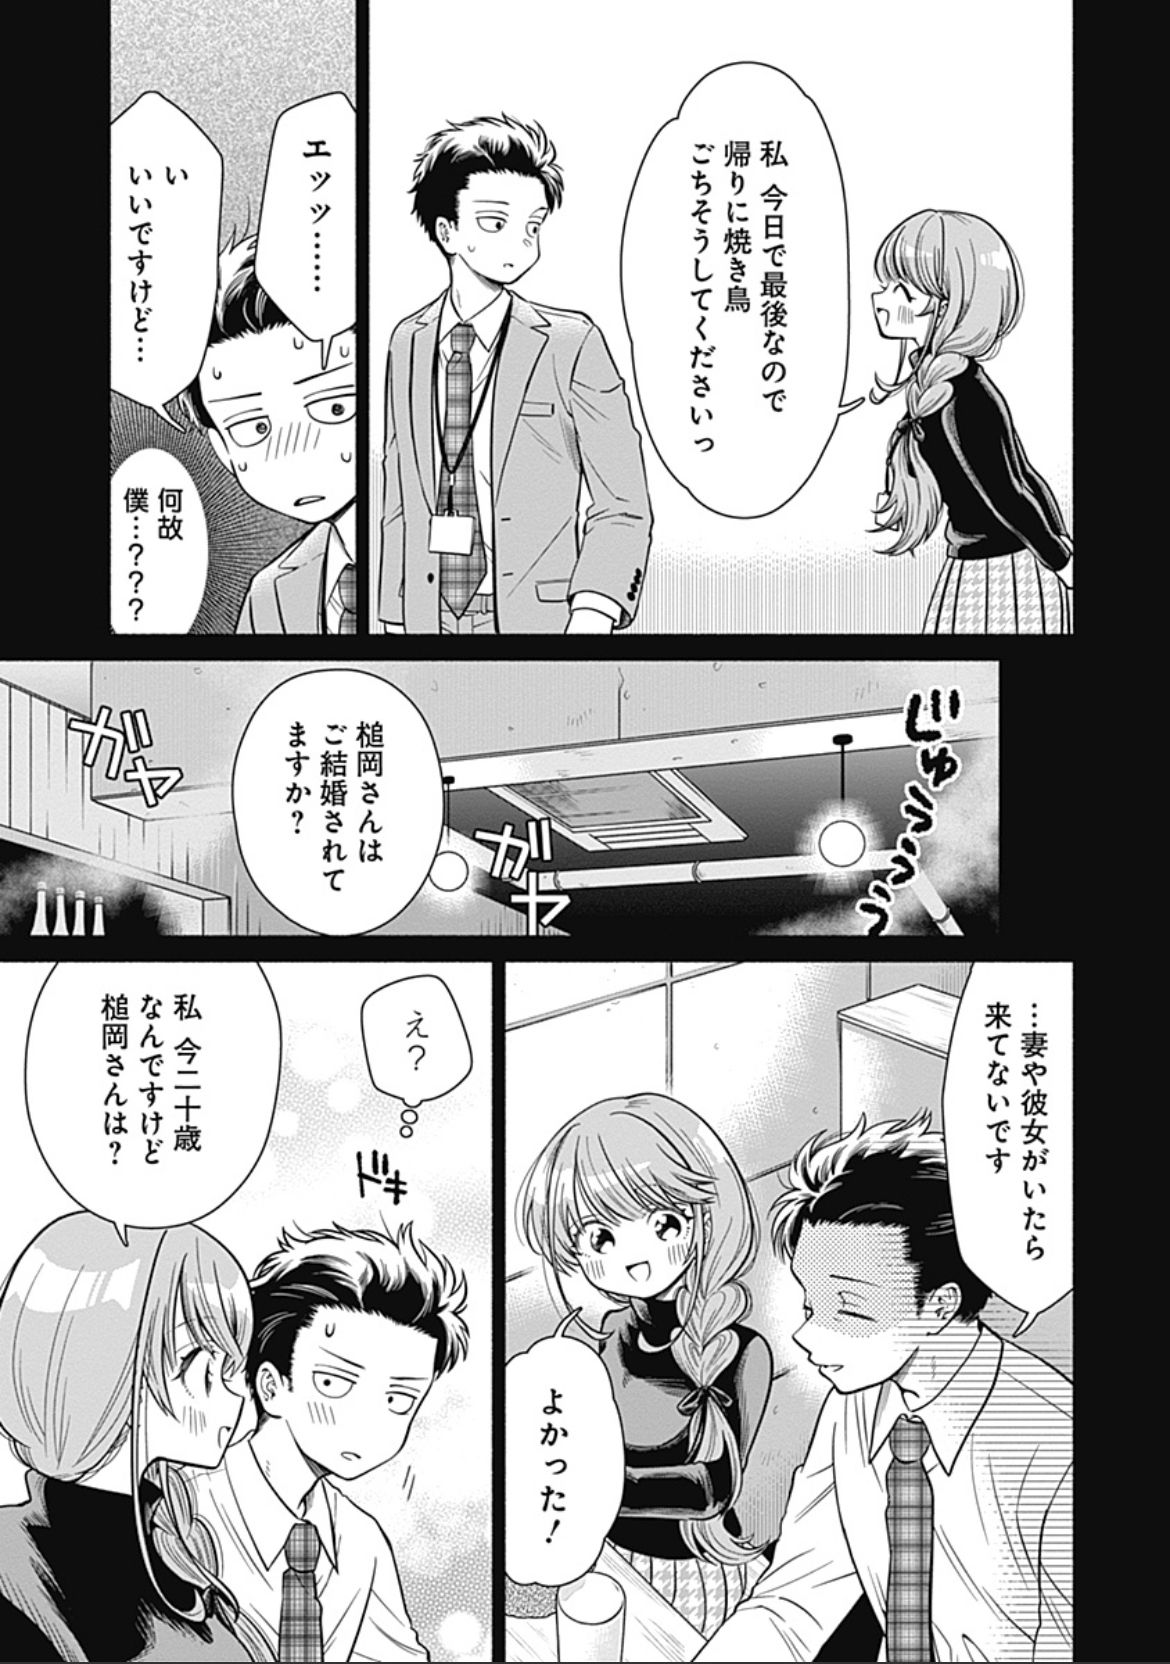 【Image】 A love comedy comic book in which an old man over 30 is enthusiastic is talked about as too much of a kimo ... 2